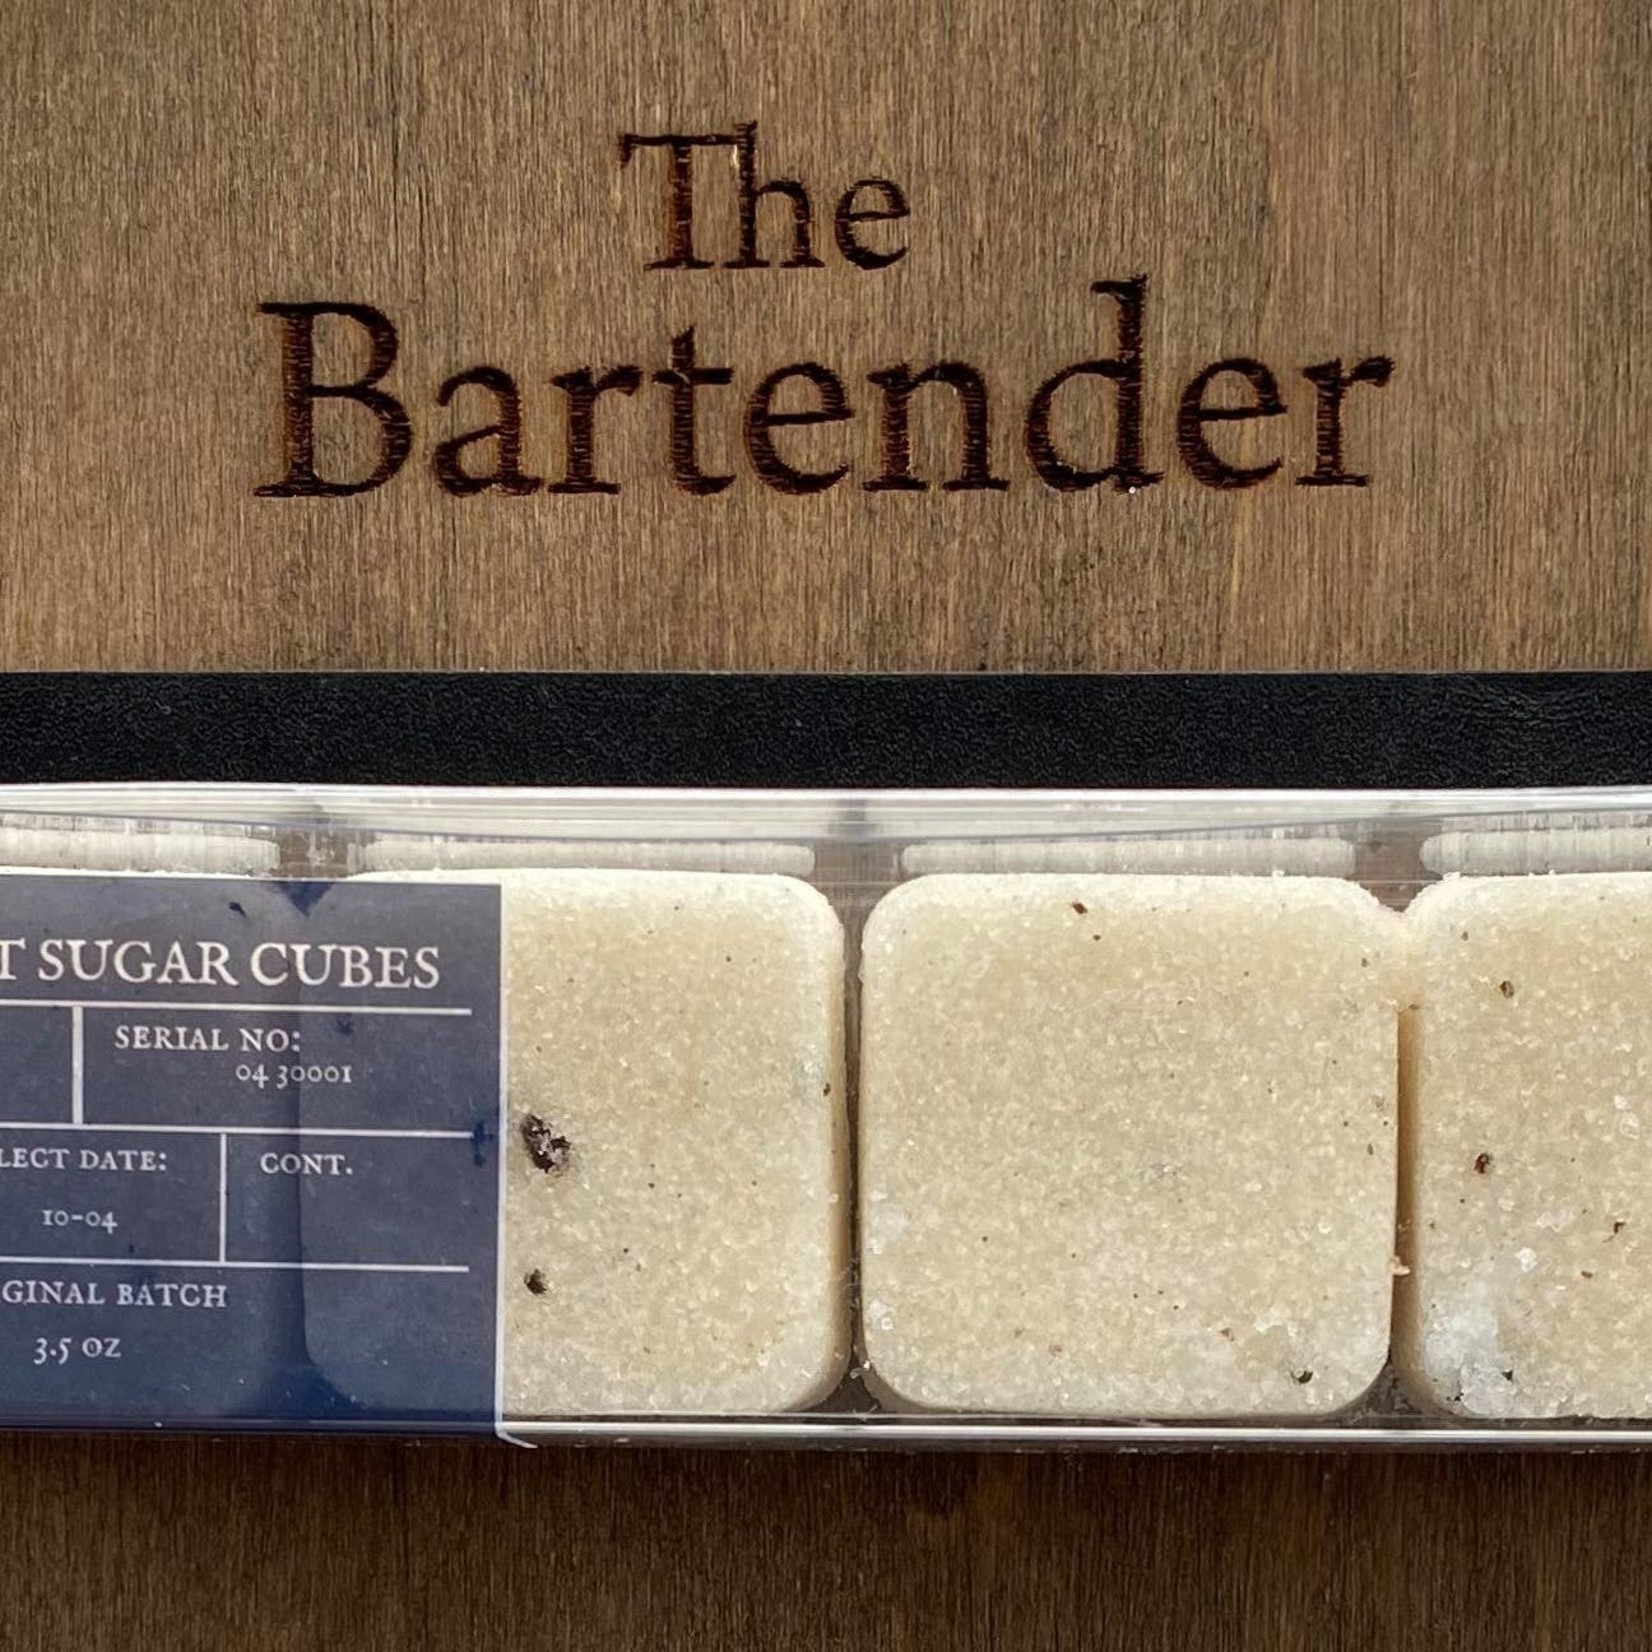 The Bartender Infused Sugar Cubes